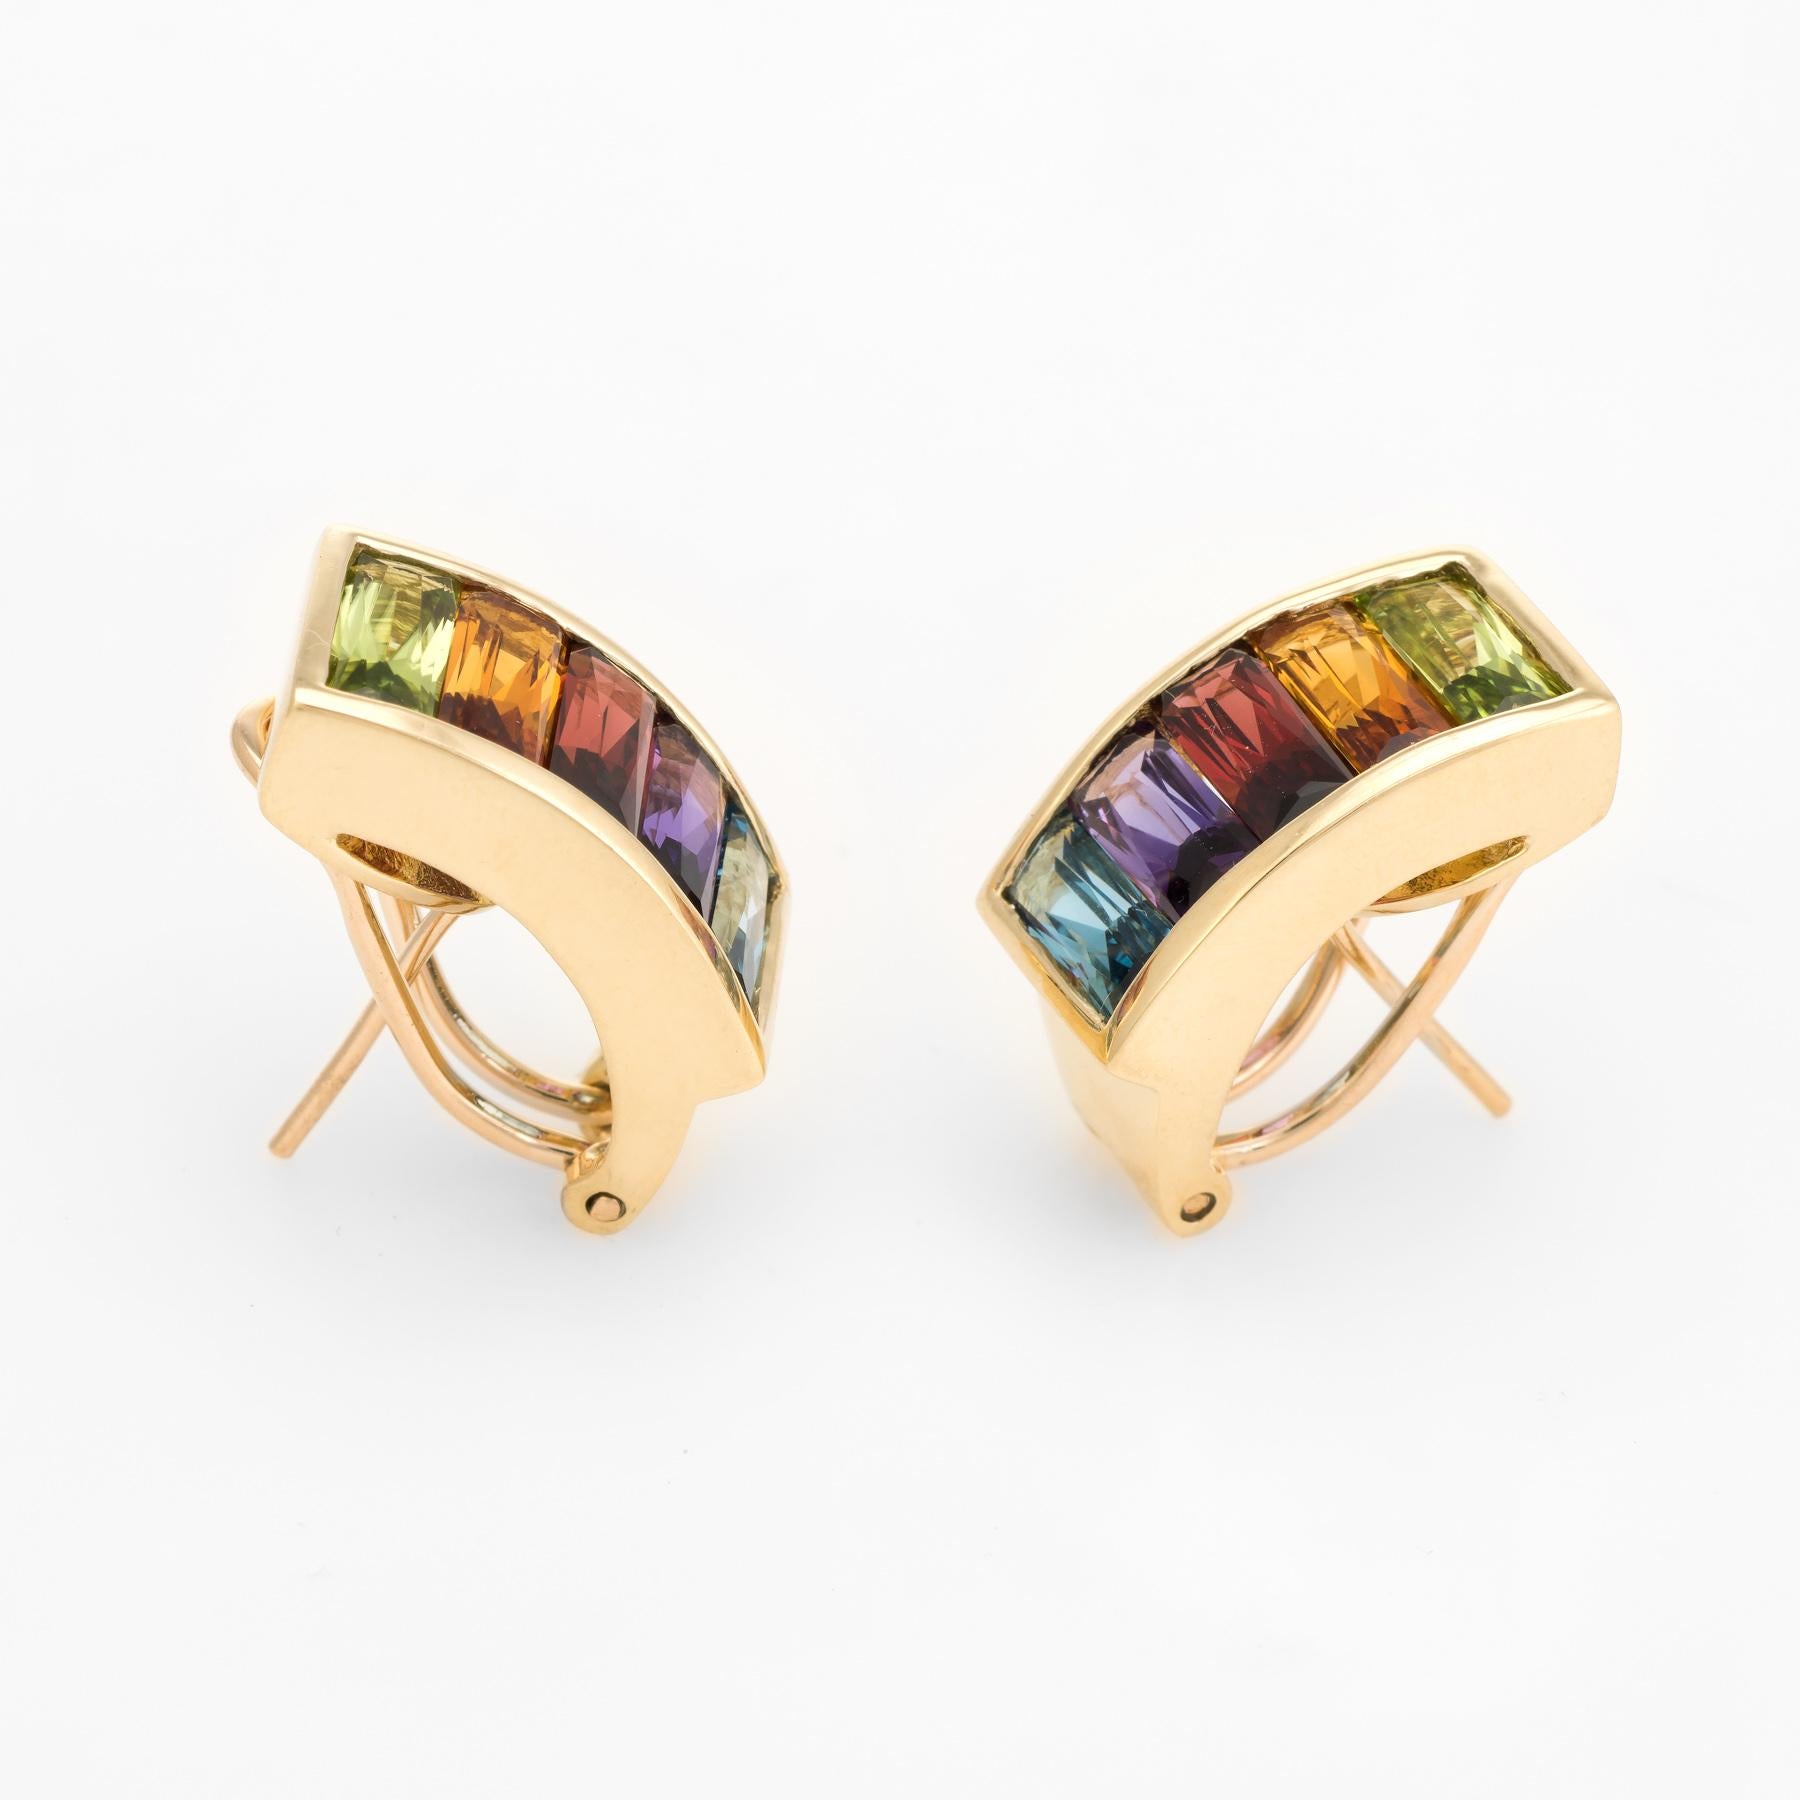 Finely detailed pair of rainbow semi precious gemstone earrings, crafted in 18k yellow gold. 

Rectangular cut faceted citrine, garnet, amethyst, blue topaz and peridot each measure 9mm x 4mm (estimated at 1.50 carats each - 15 carats total